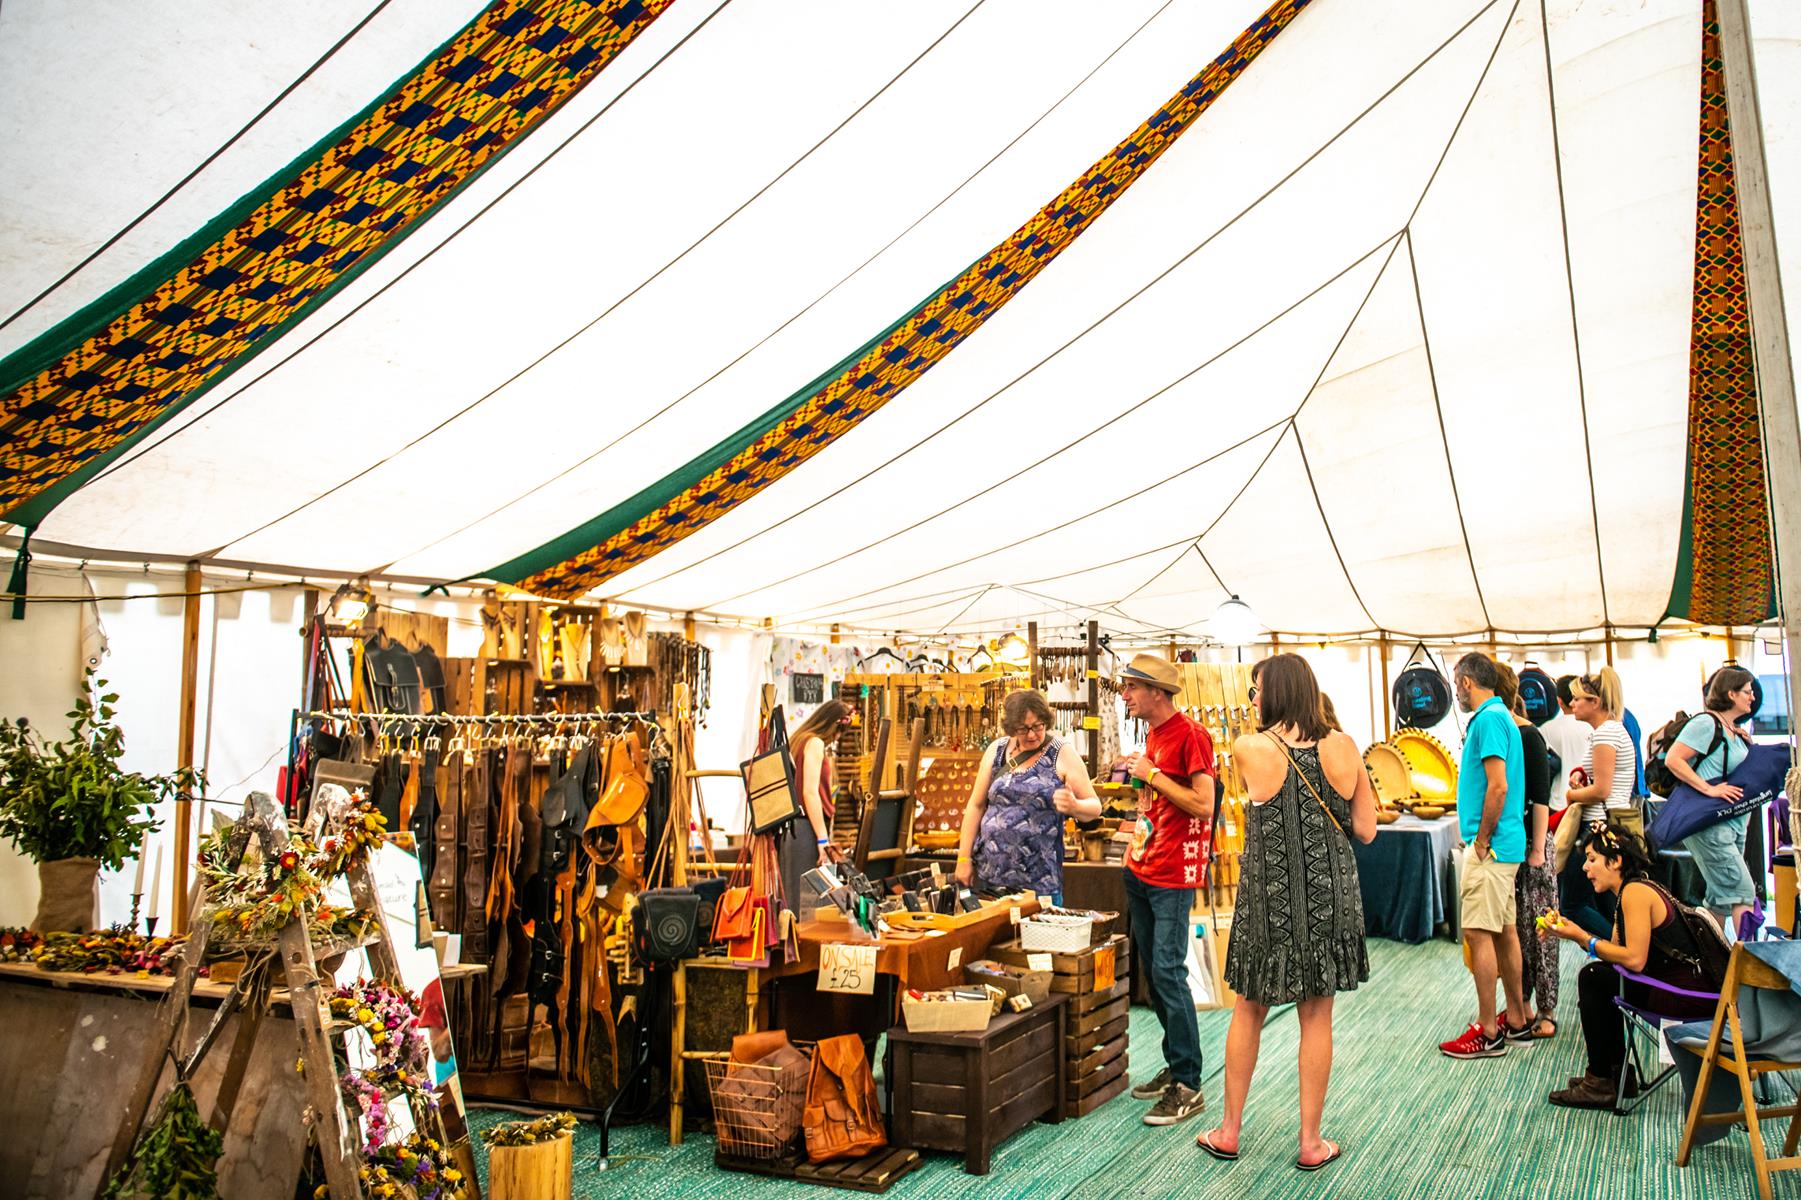 WOMAD Festival - trader stall selling leather goods inside a craft tent.